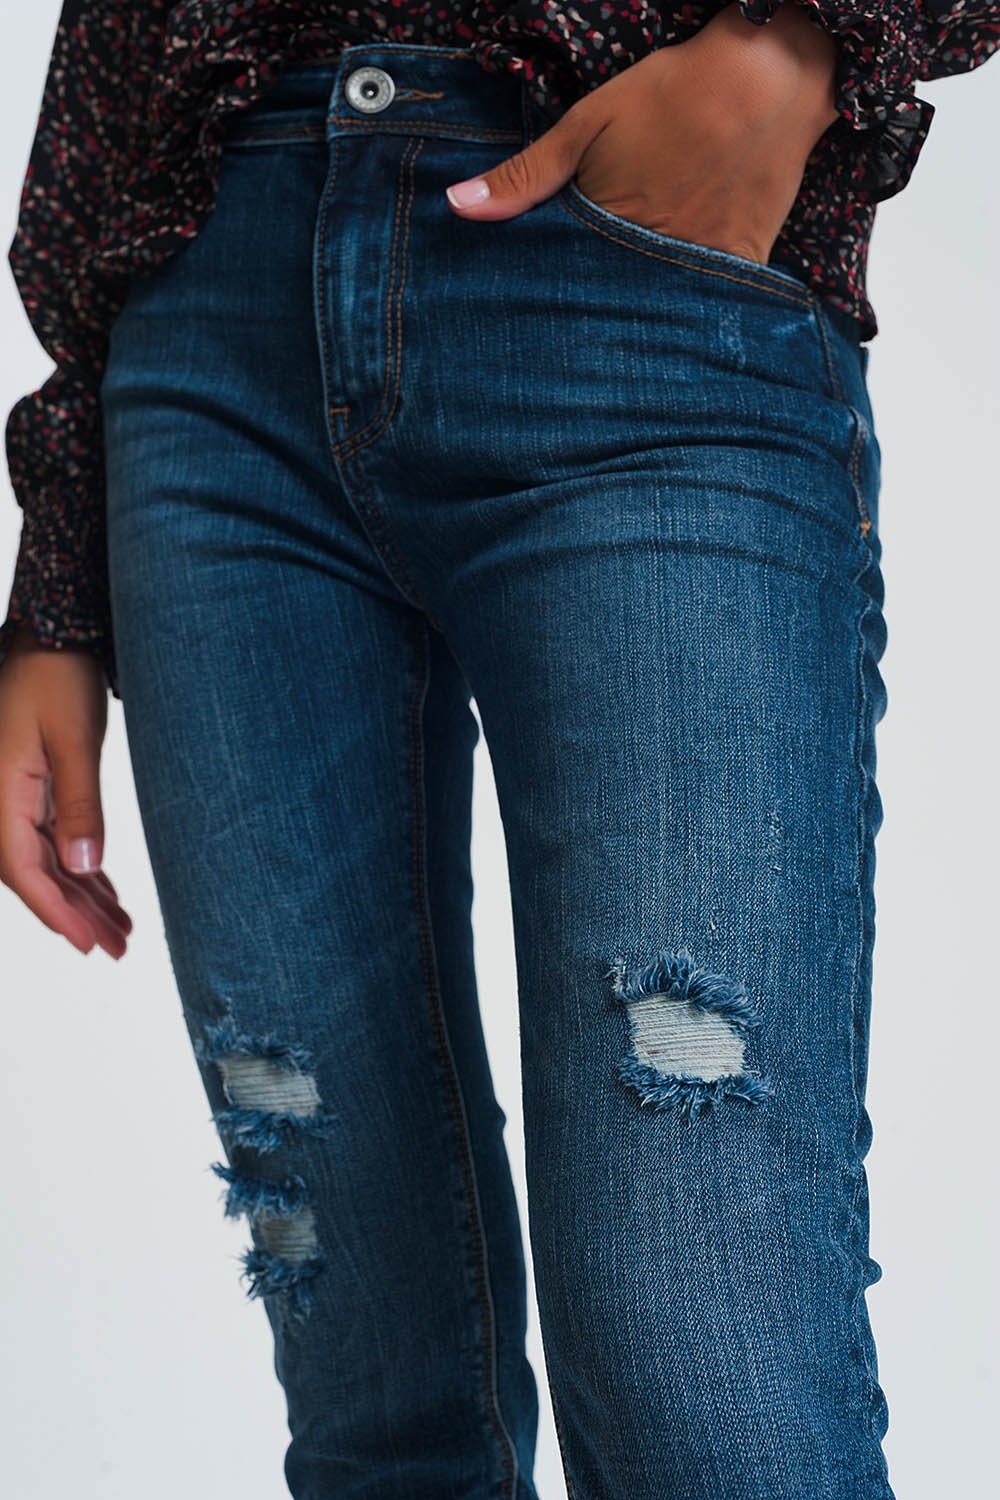 High Waisted Skinny Jeans in Dark Wash Blue With Ripped Details